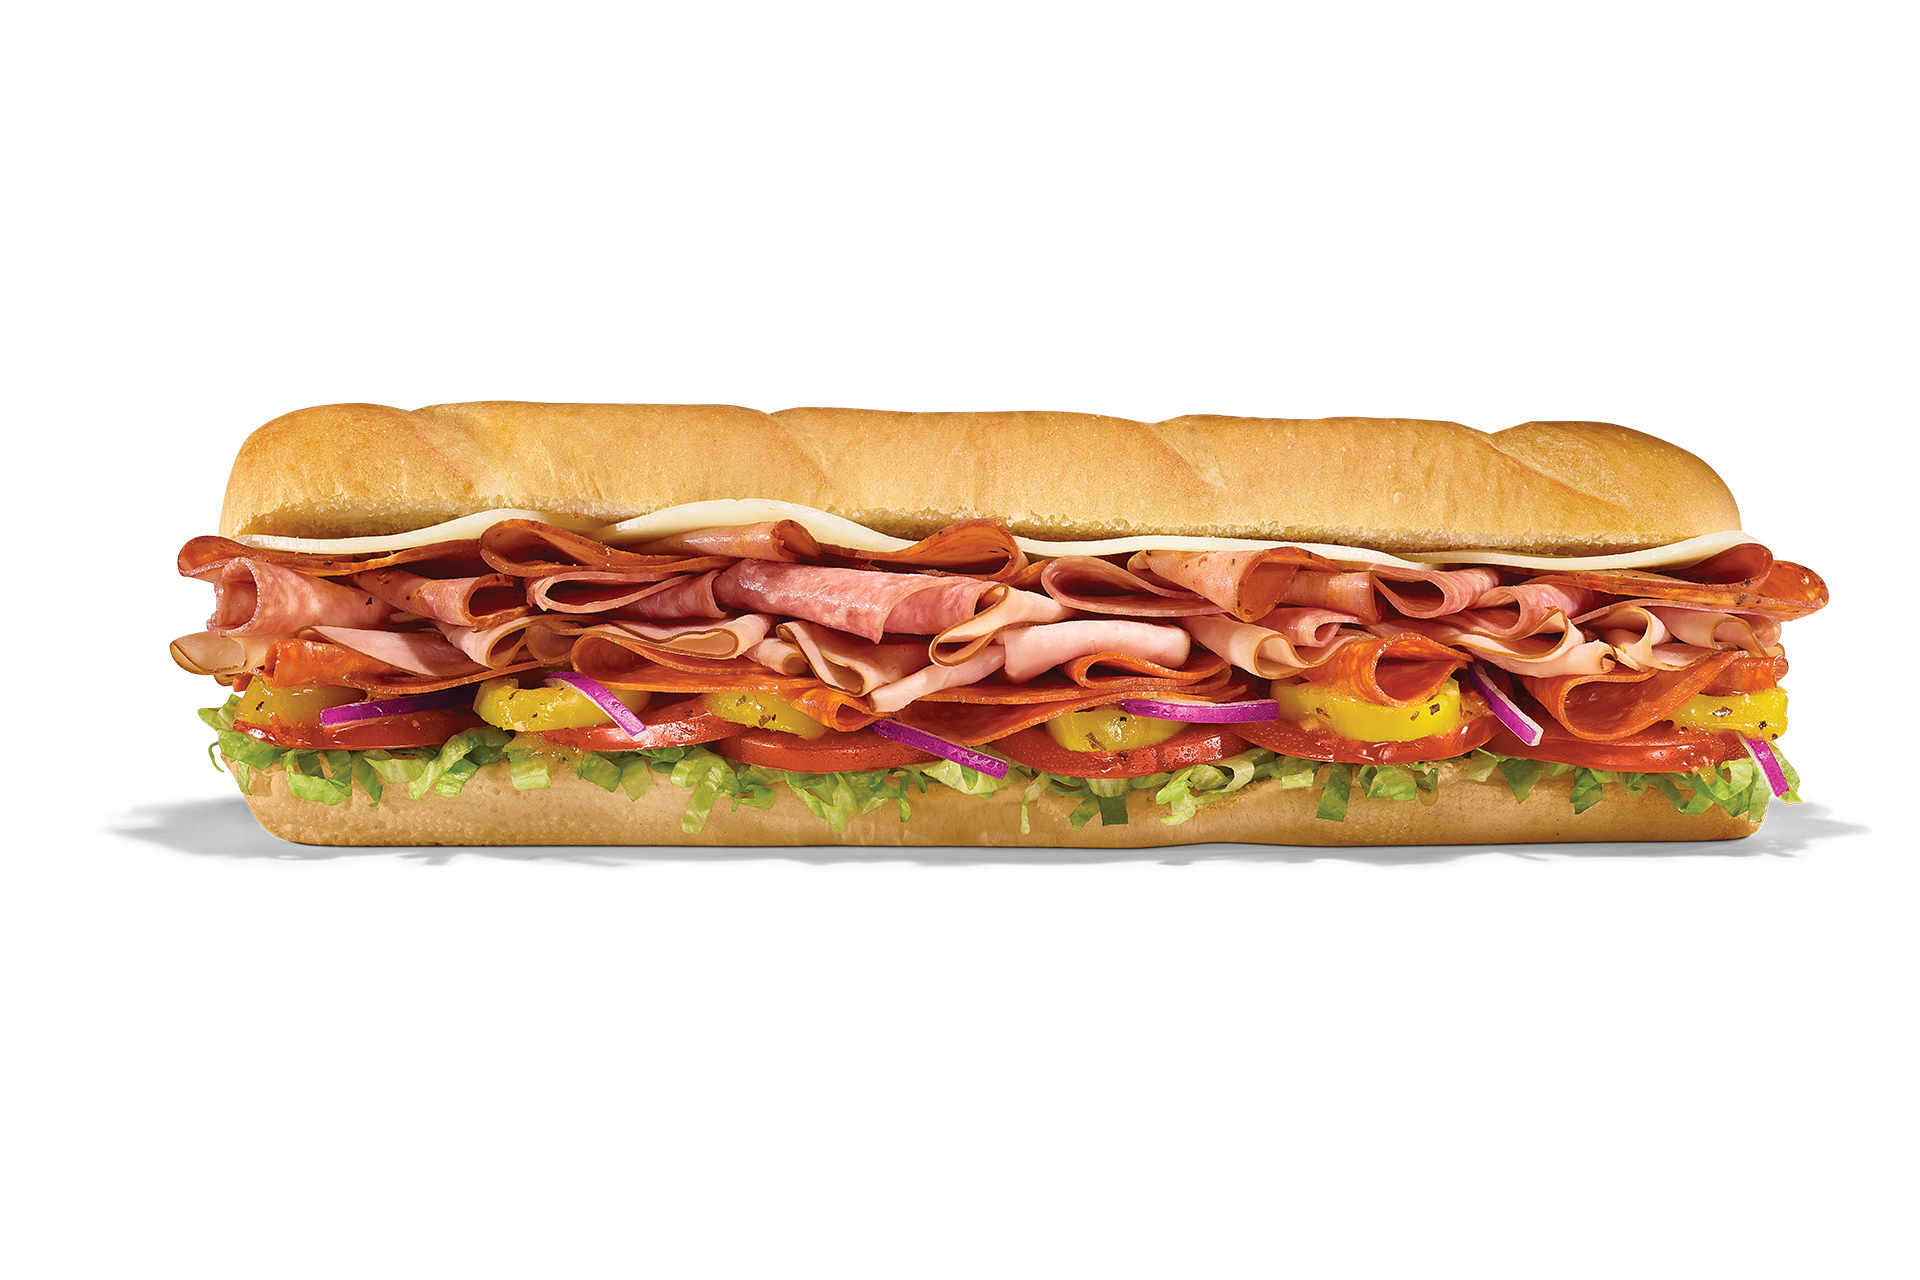 Subway makes major change to its menu, biggest in chain's history